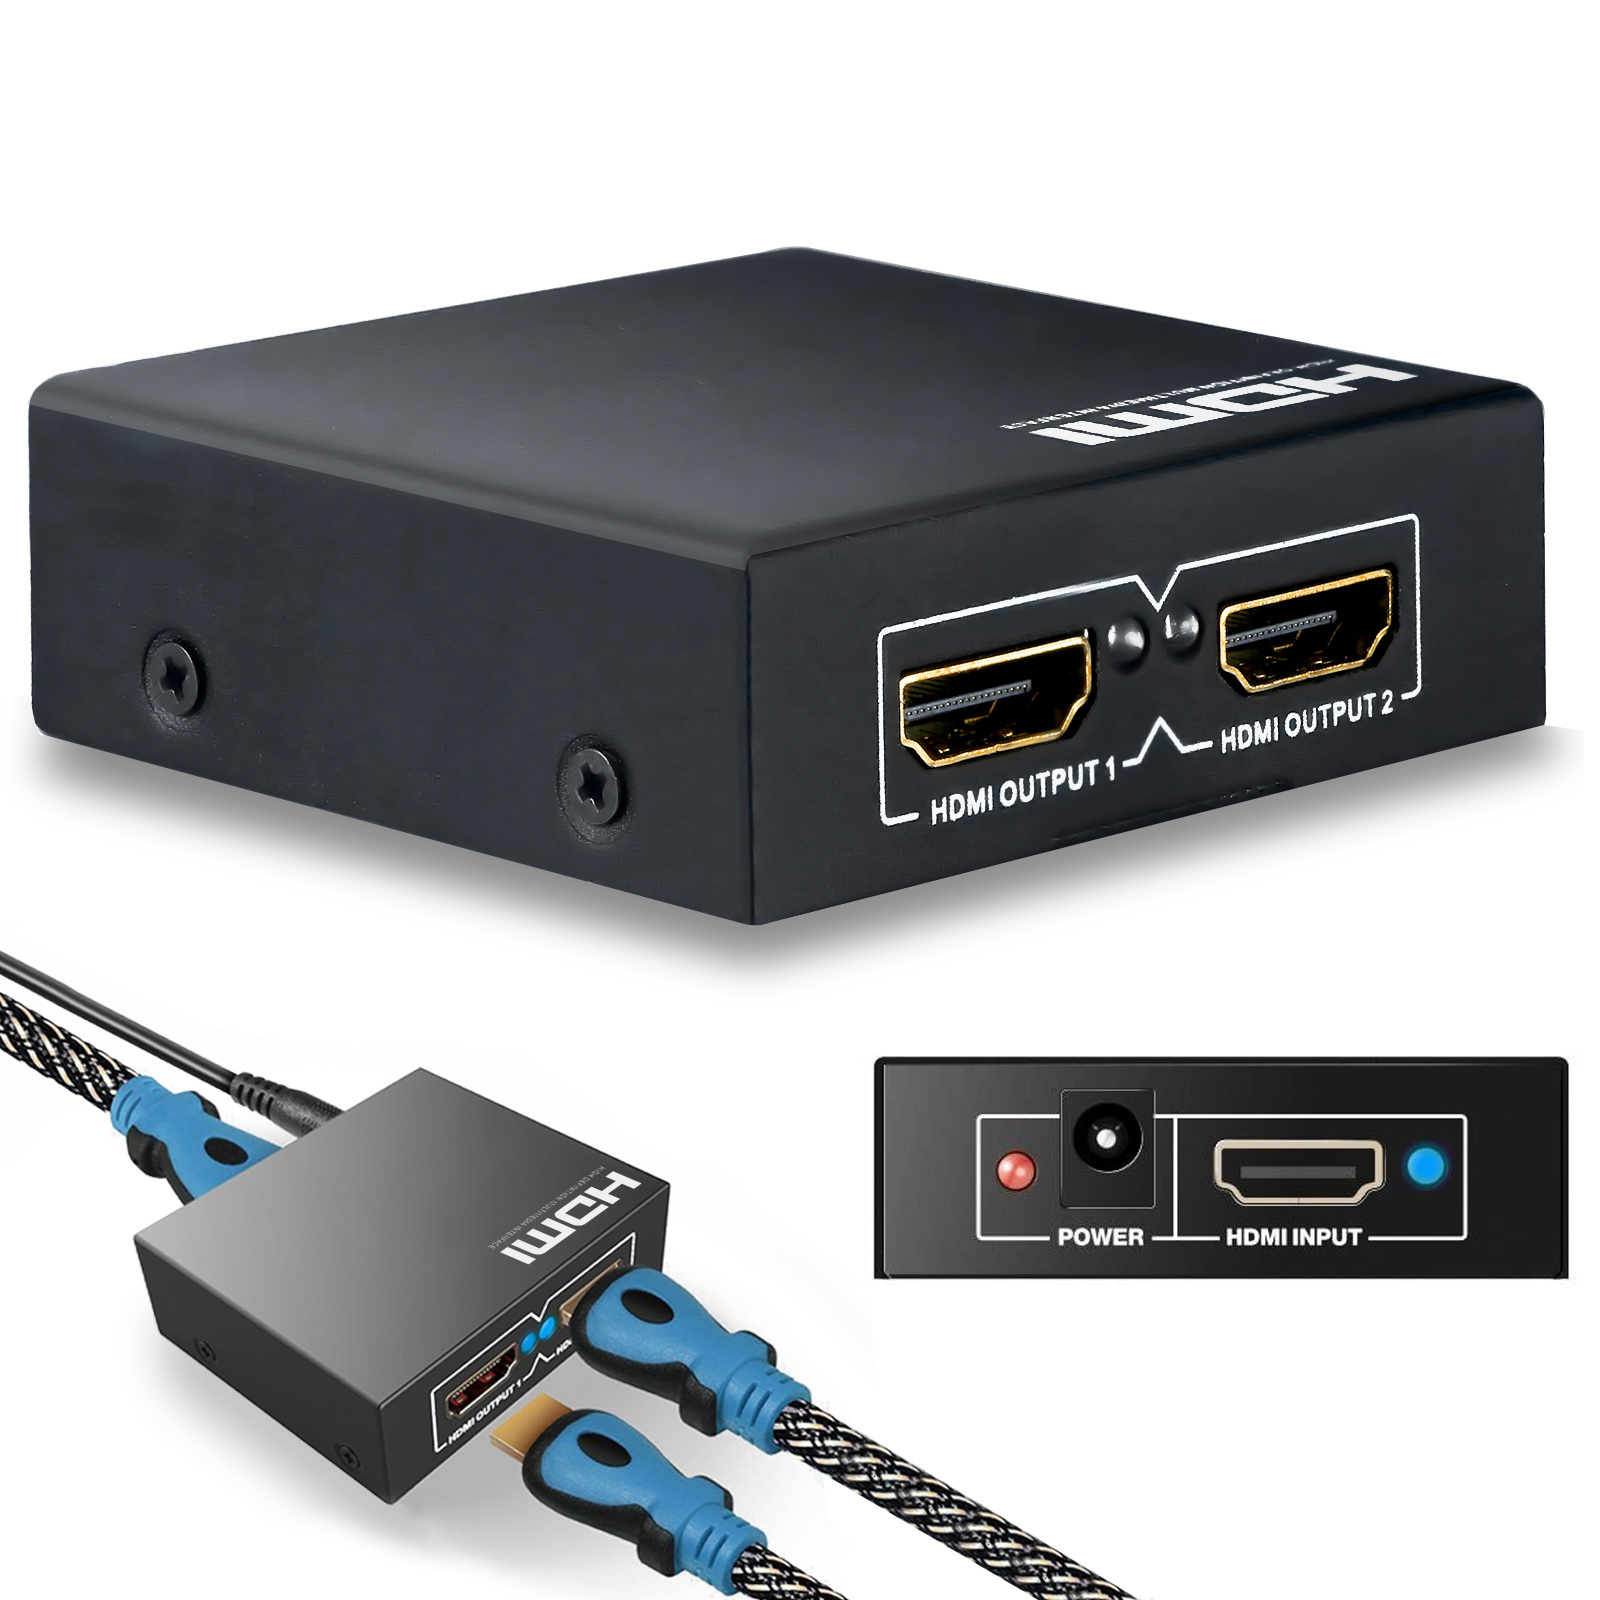 HDMI Splitter 1x2 with 4K Support - Duplicate the Same Video on 2 Displays  - DynoTech (400036) - Best Deal in Town